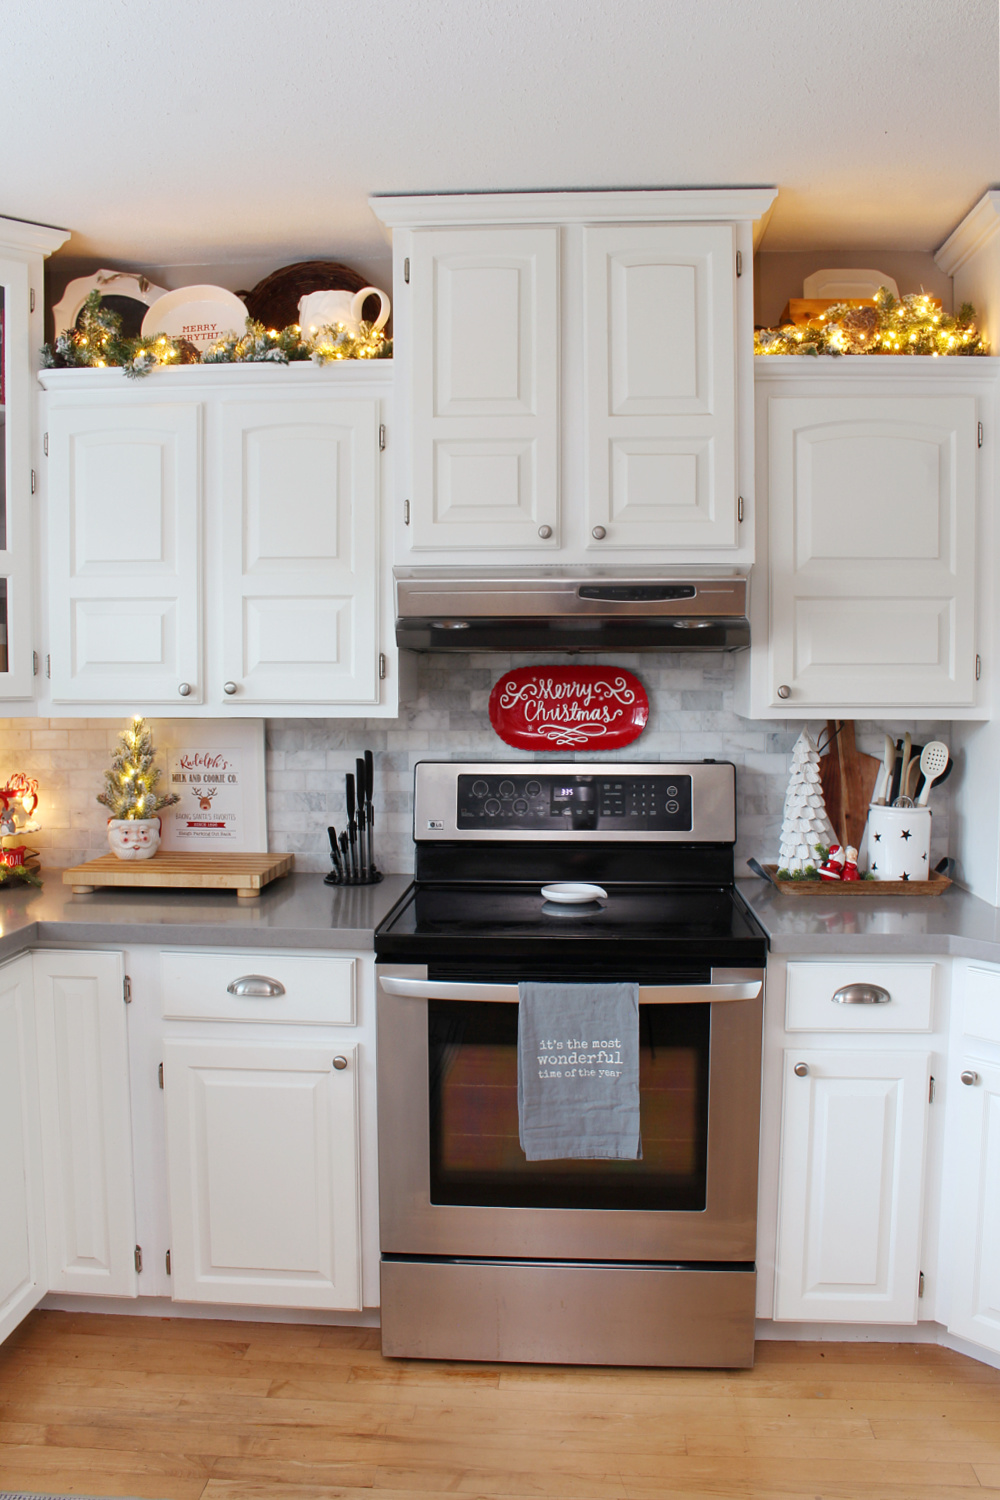 White kitchen decorated for Christmas with red and white decor with twinkle lights.